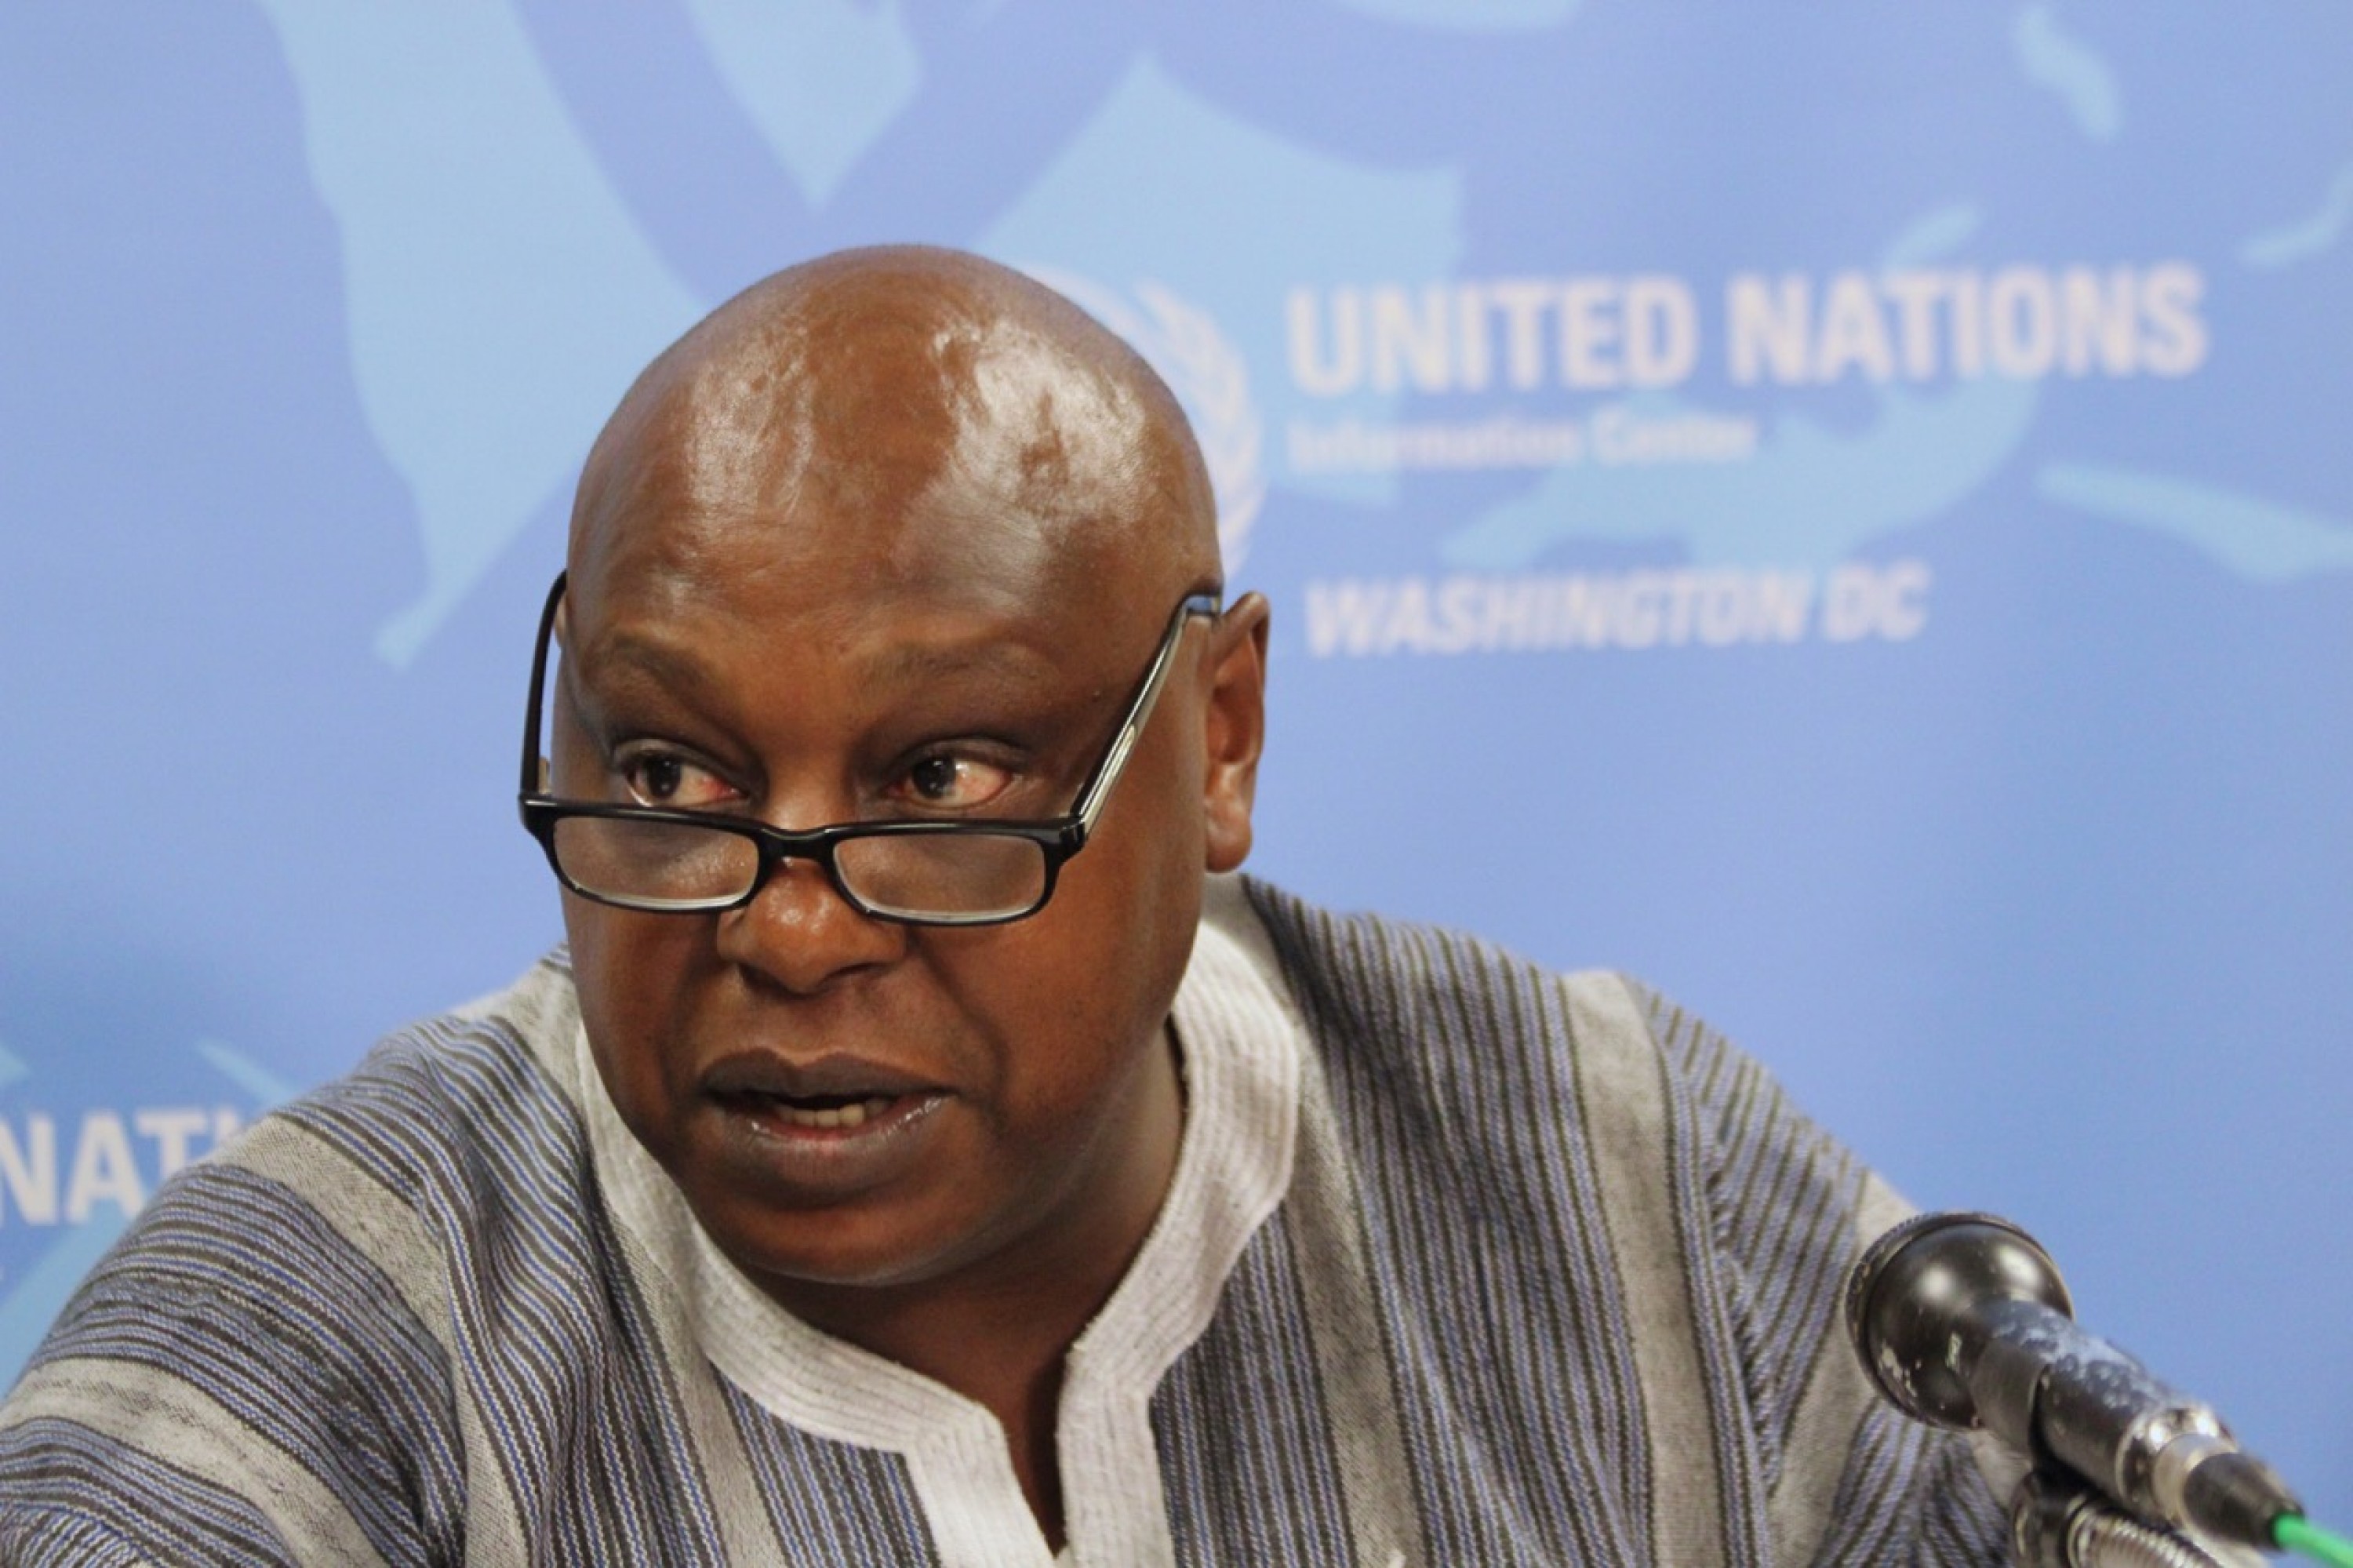 UN Special Rapporteur on the rights to freedom of peaceful assembly and of association, Mr. Maina Kiai. Photo: CNSNews.com